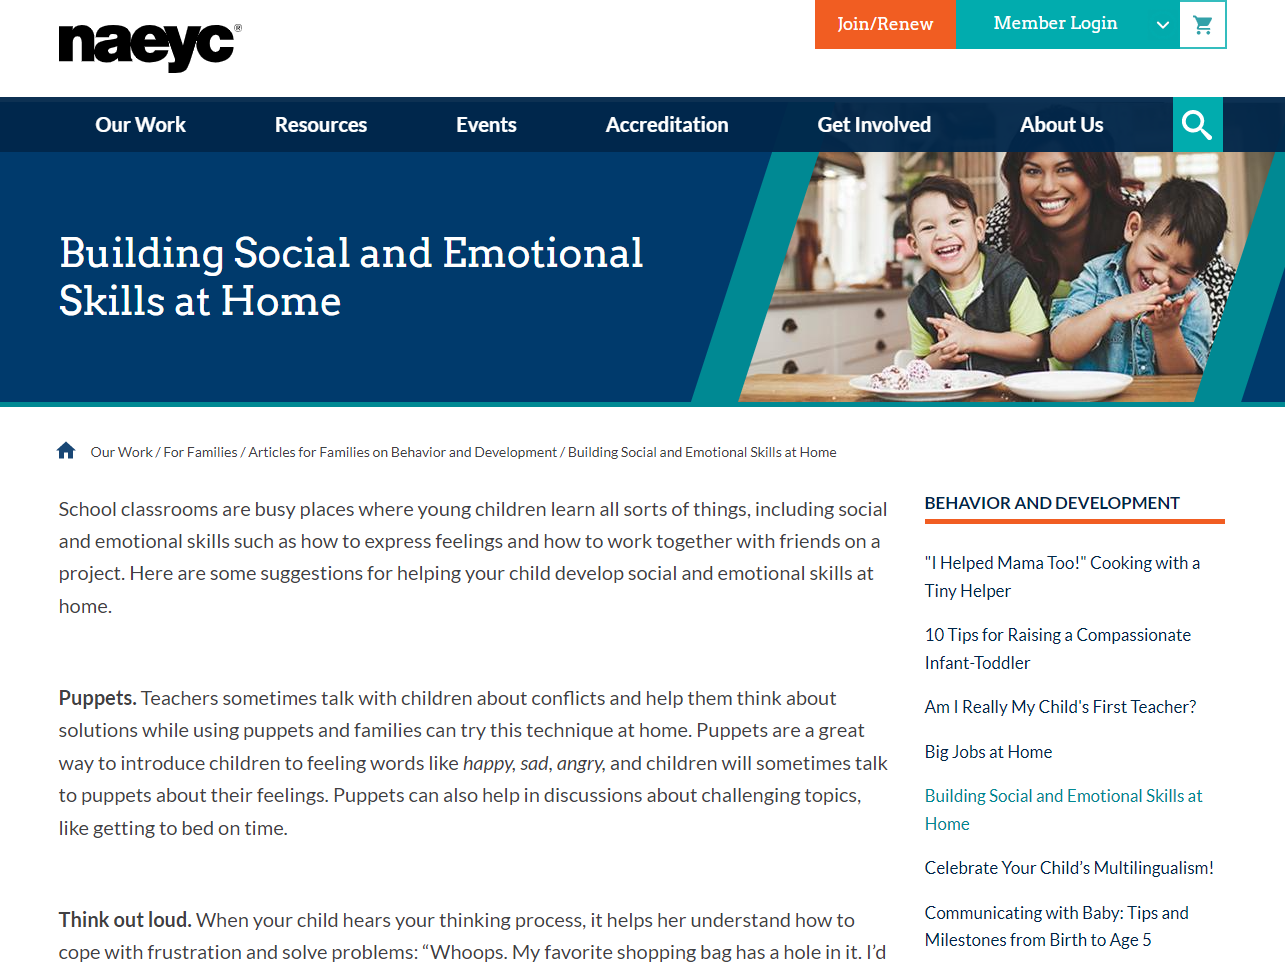 Building Social and Emotional Skills at Home: NAEYC